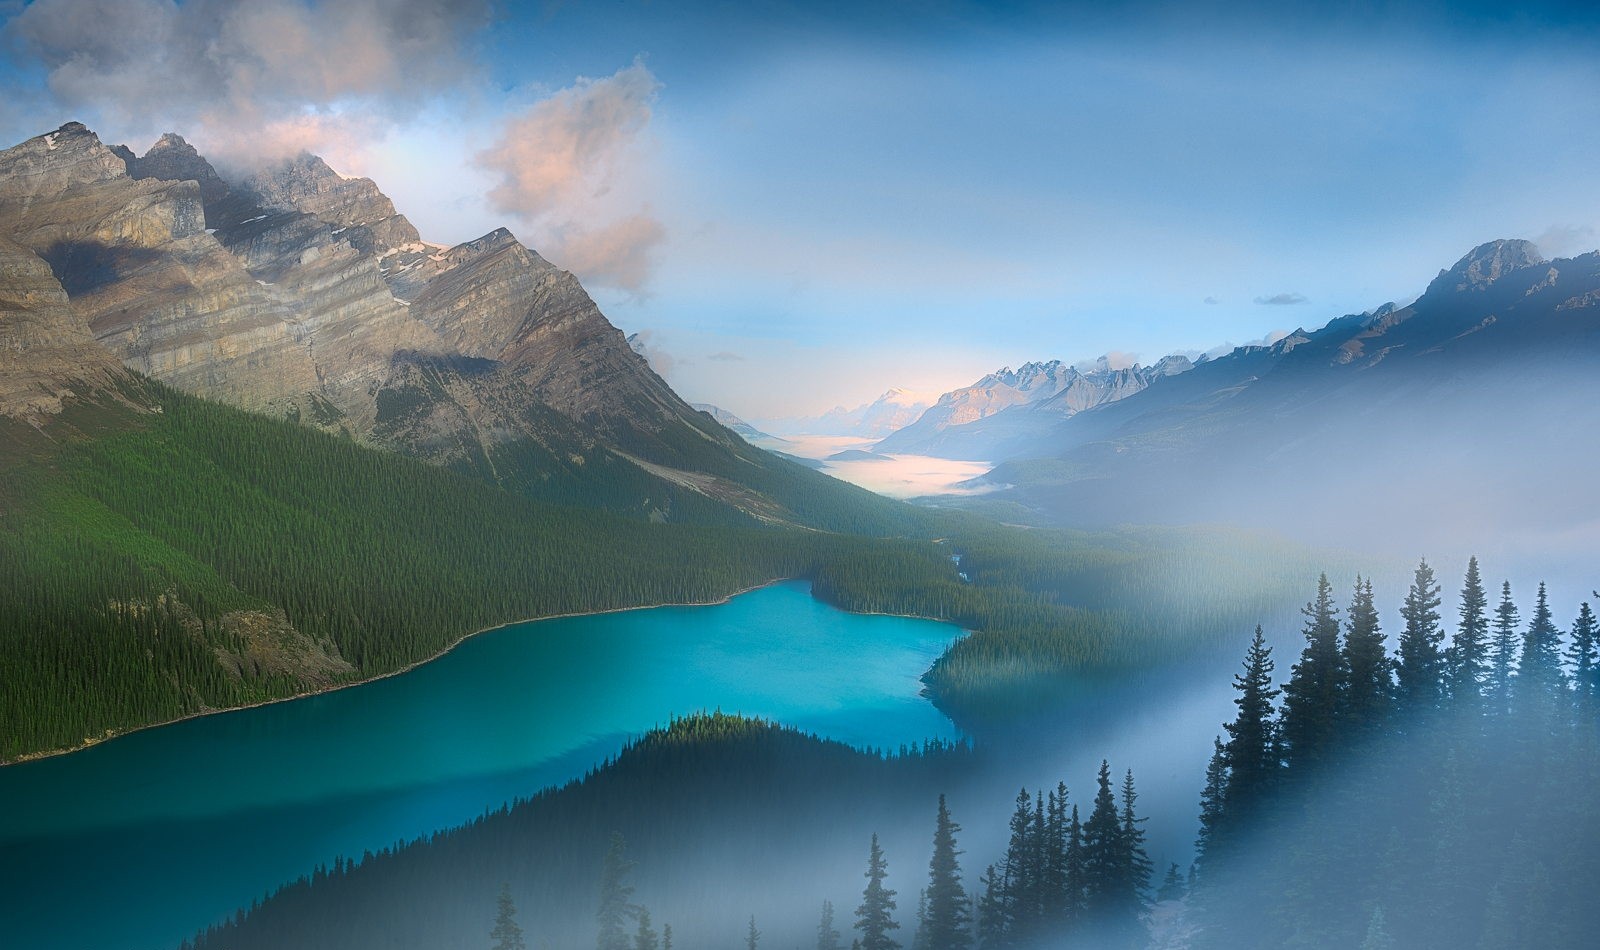 General 1600x950 nature photography landscape lake mountains forest mist turquoise water pine trees valley Banff National Park Canada Peyto Lake